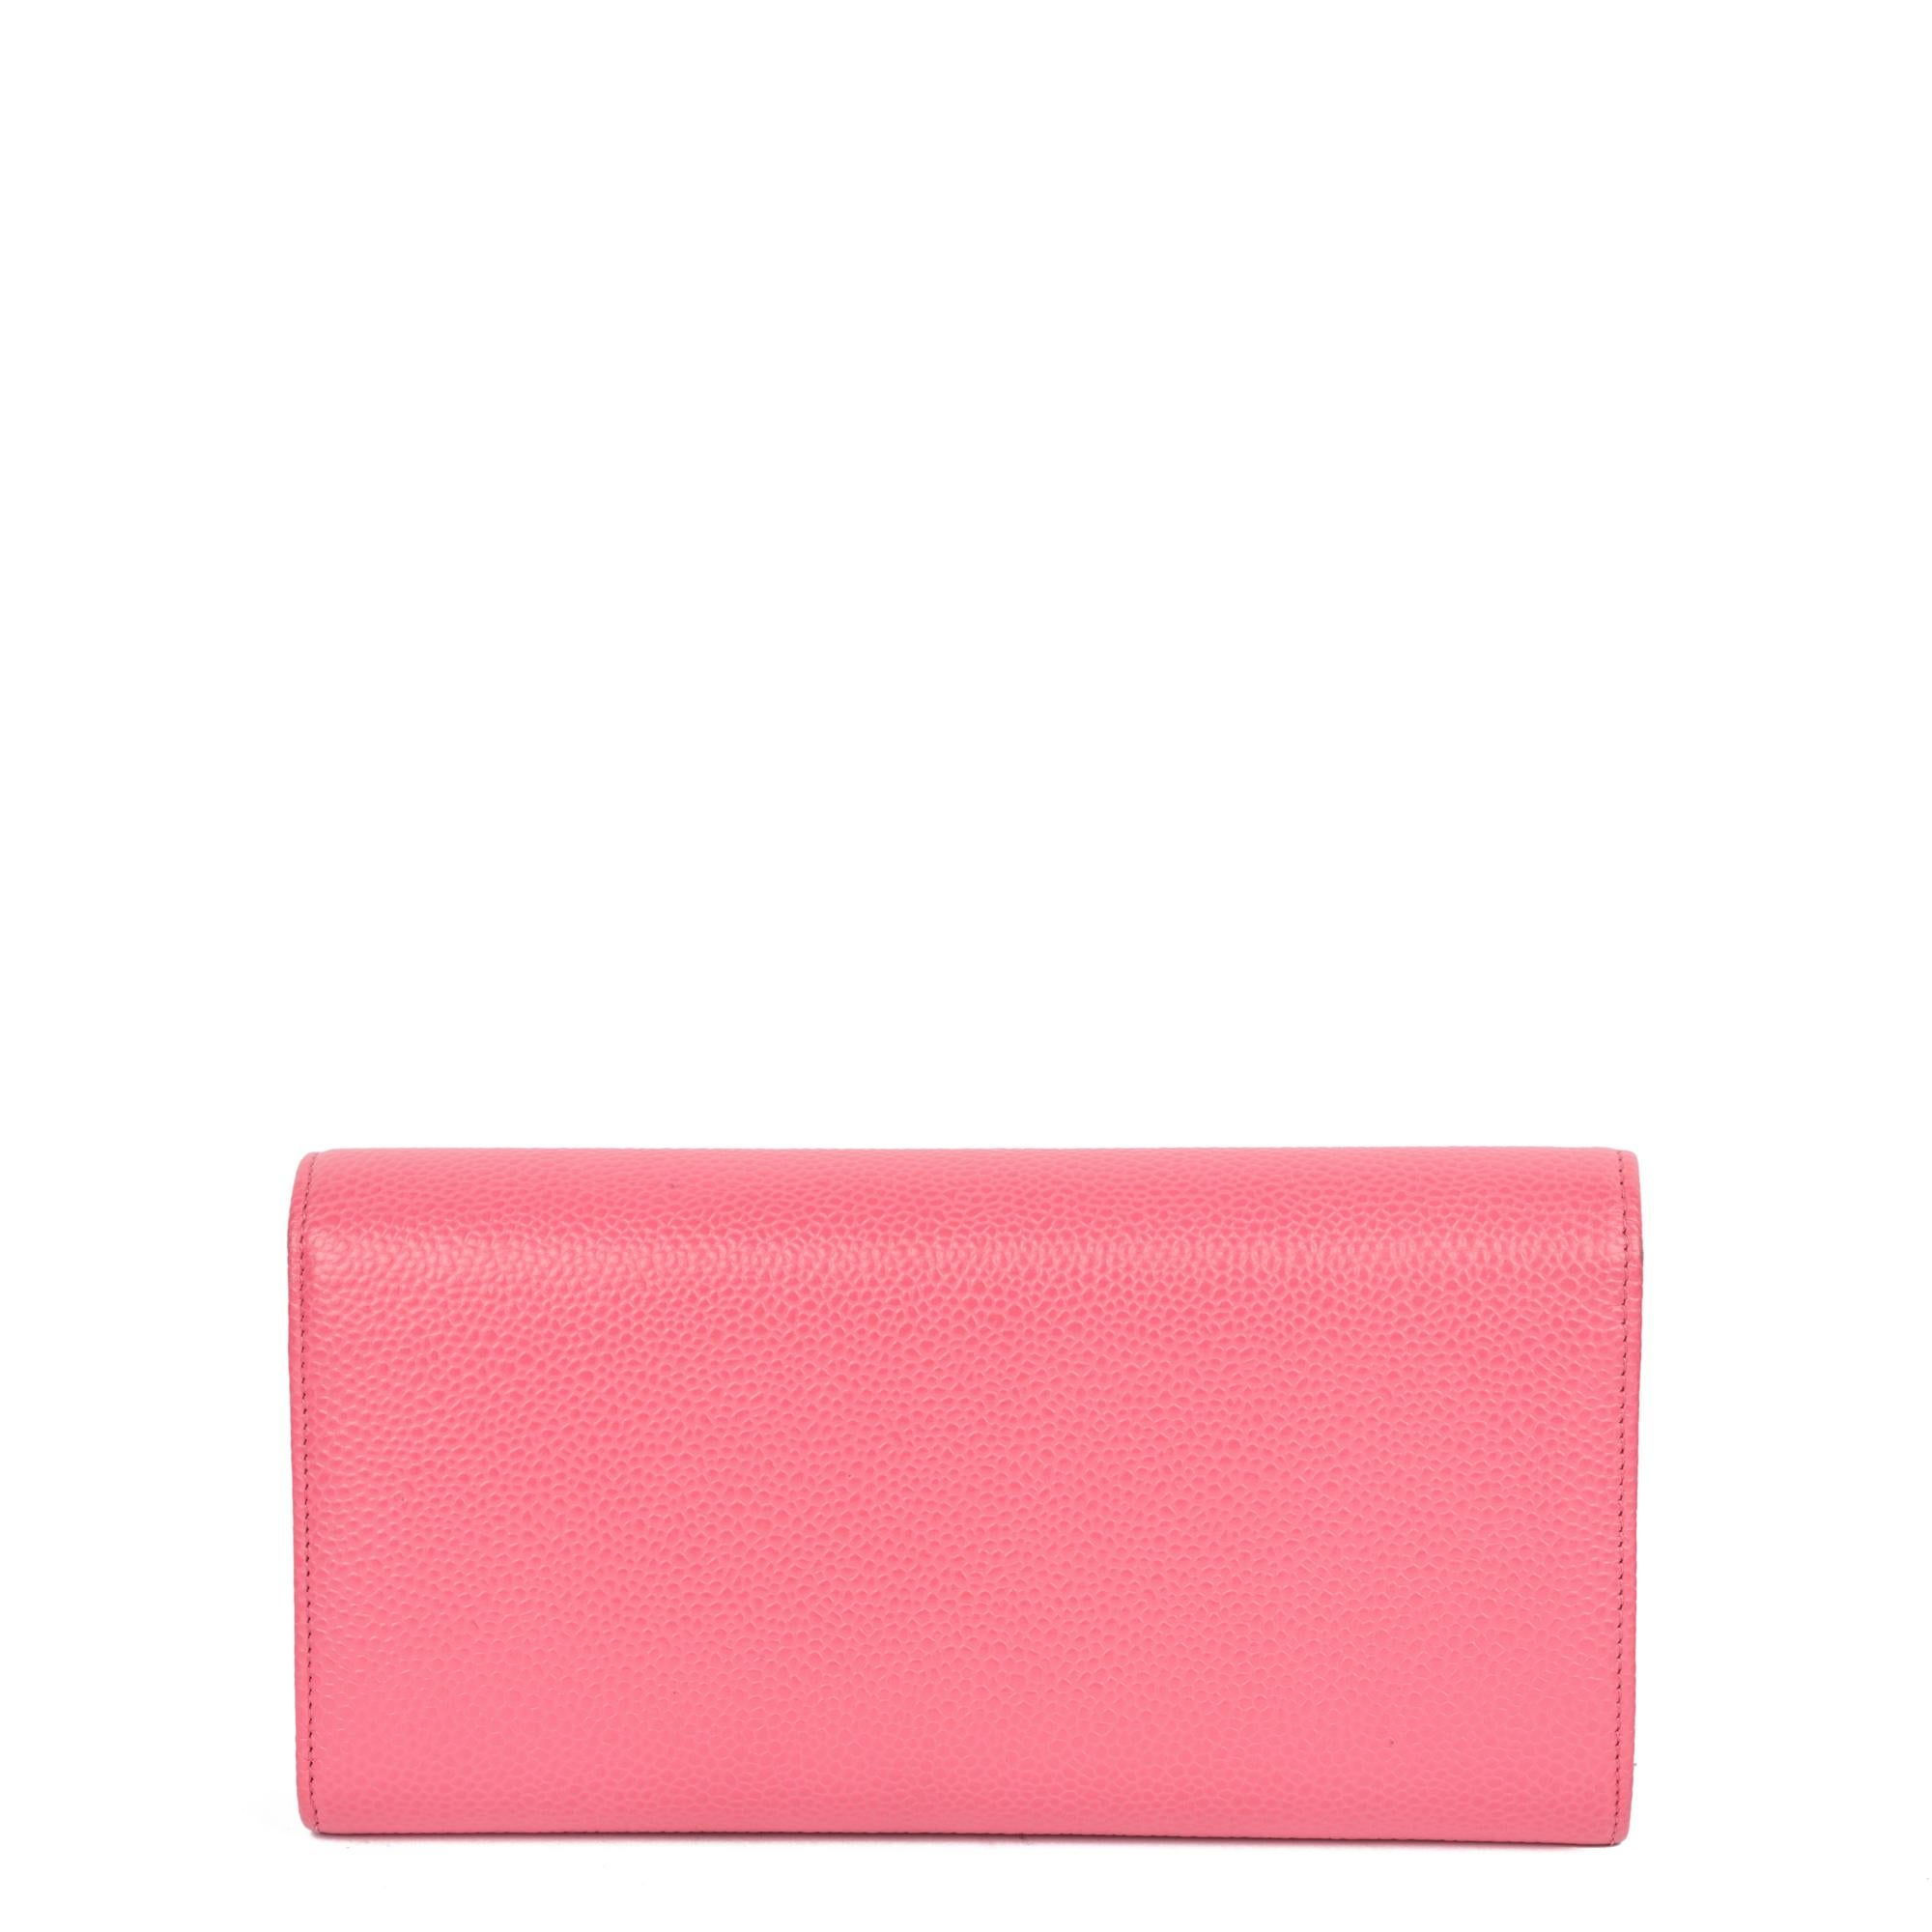 Chanel Pink Caviar Leather Long Wallet

CONDITION NOTES
The exterior is in very good condition with minimal signs of use.
The interior is in exceptional condition with minimal signs of use.
The hardware is in very good condition with light signs of